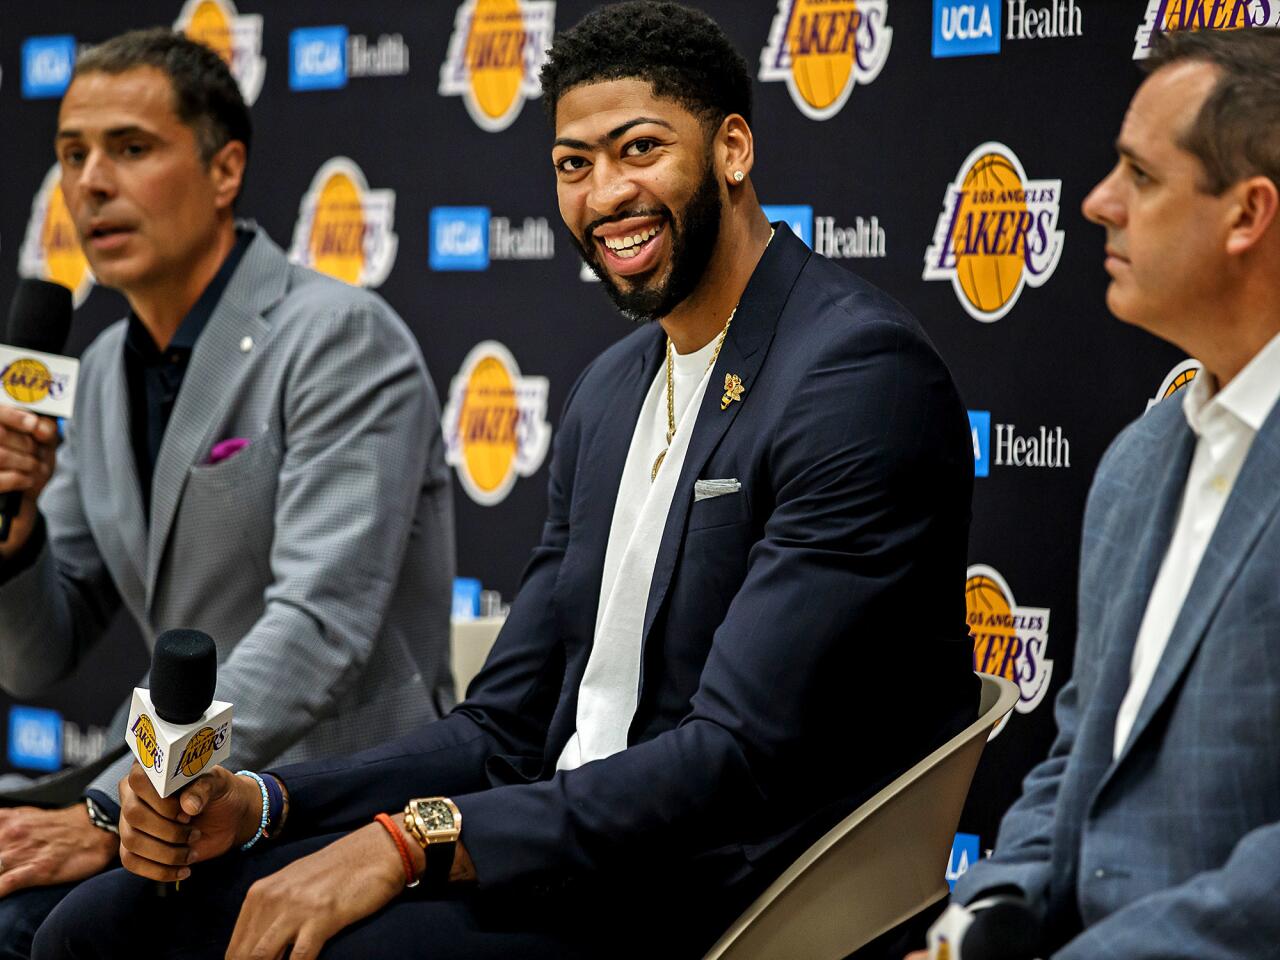 Lakers general manager Rob Pelinka, Anthony Davis and head coach Frank Vogel, from left, at a news conference introducing the Lakers’ new star in El Segundo on Saturday.